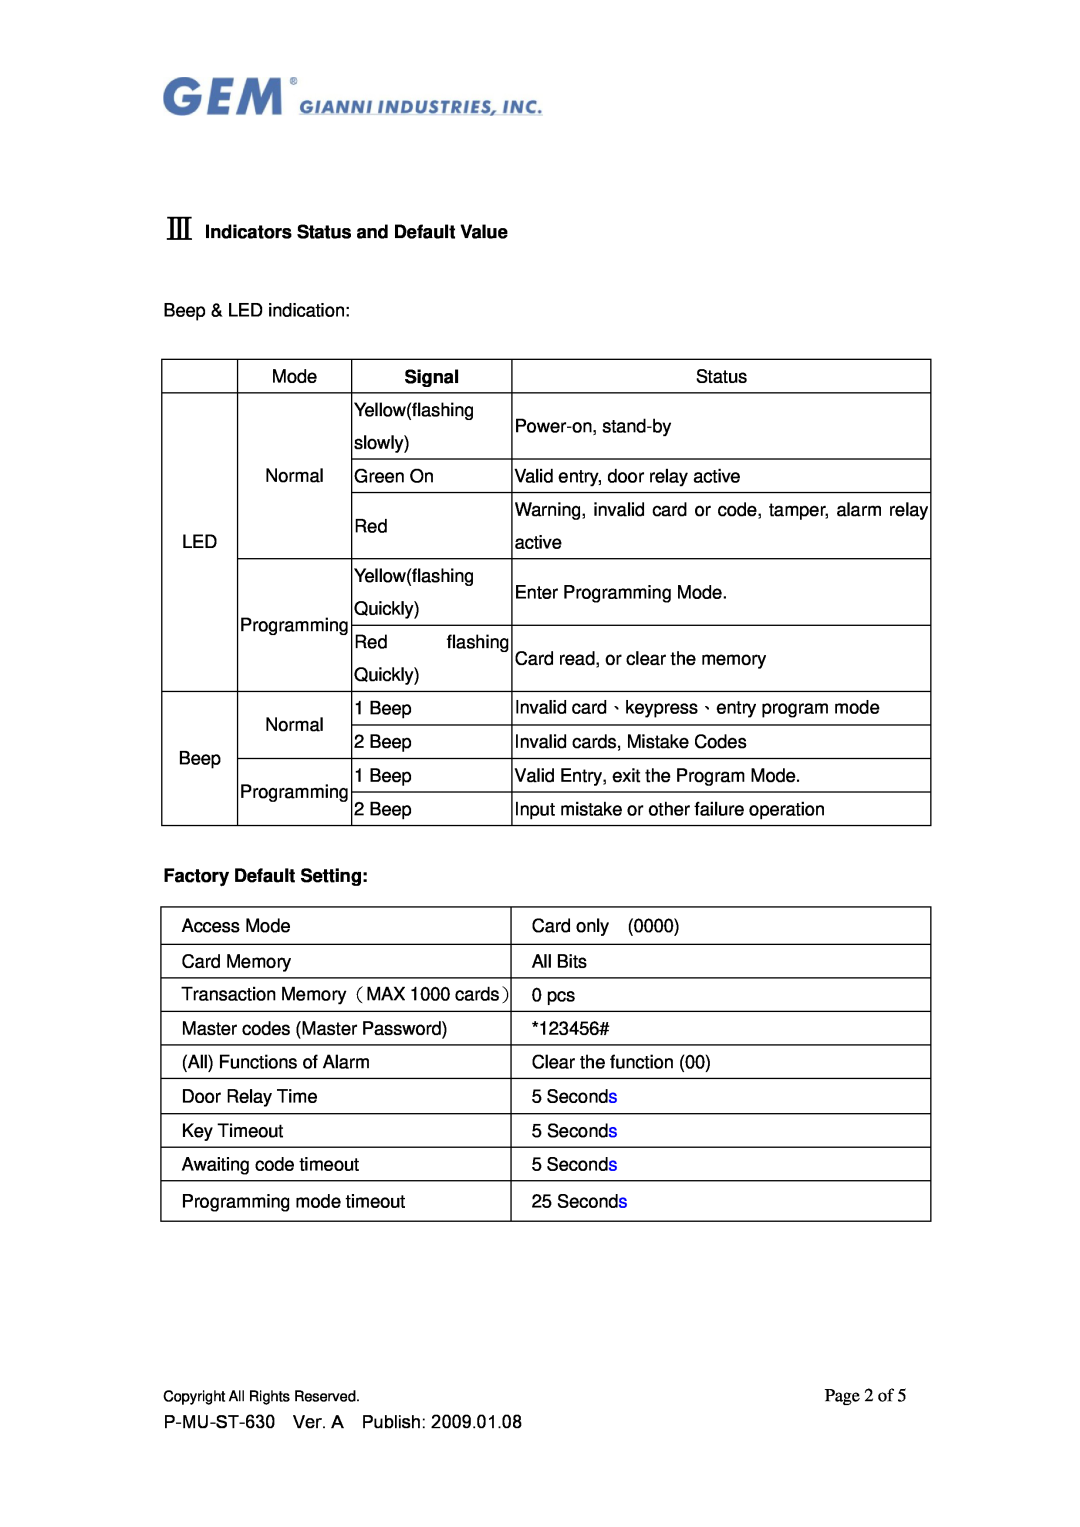 Gianni Industries ST-630E specifications Page 2 of, Ⅲ Indicators Status and Default Value, Signal, Factory Default Setting 